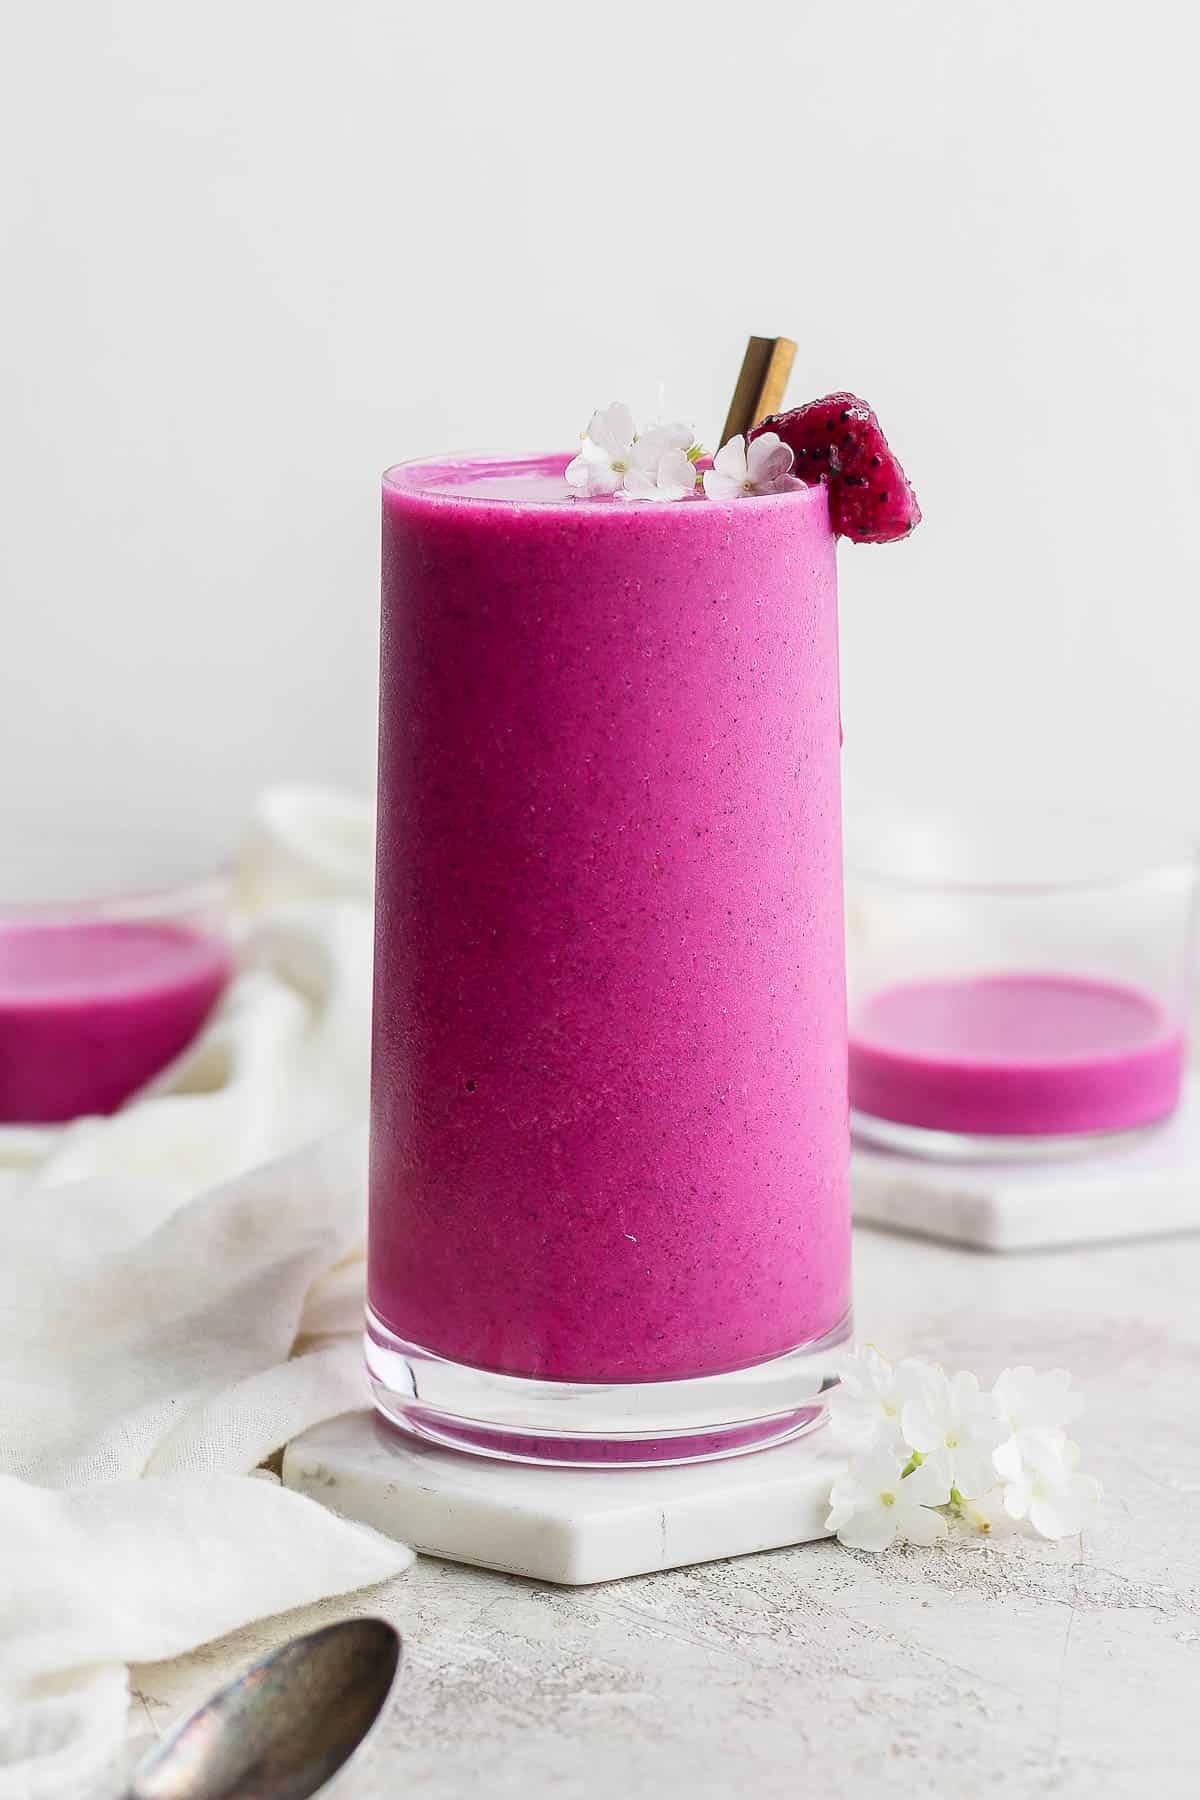 A dragonfruit smoothie in a glass.